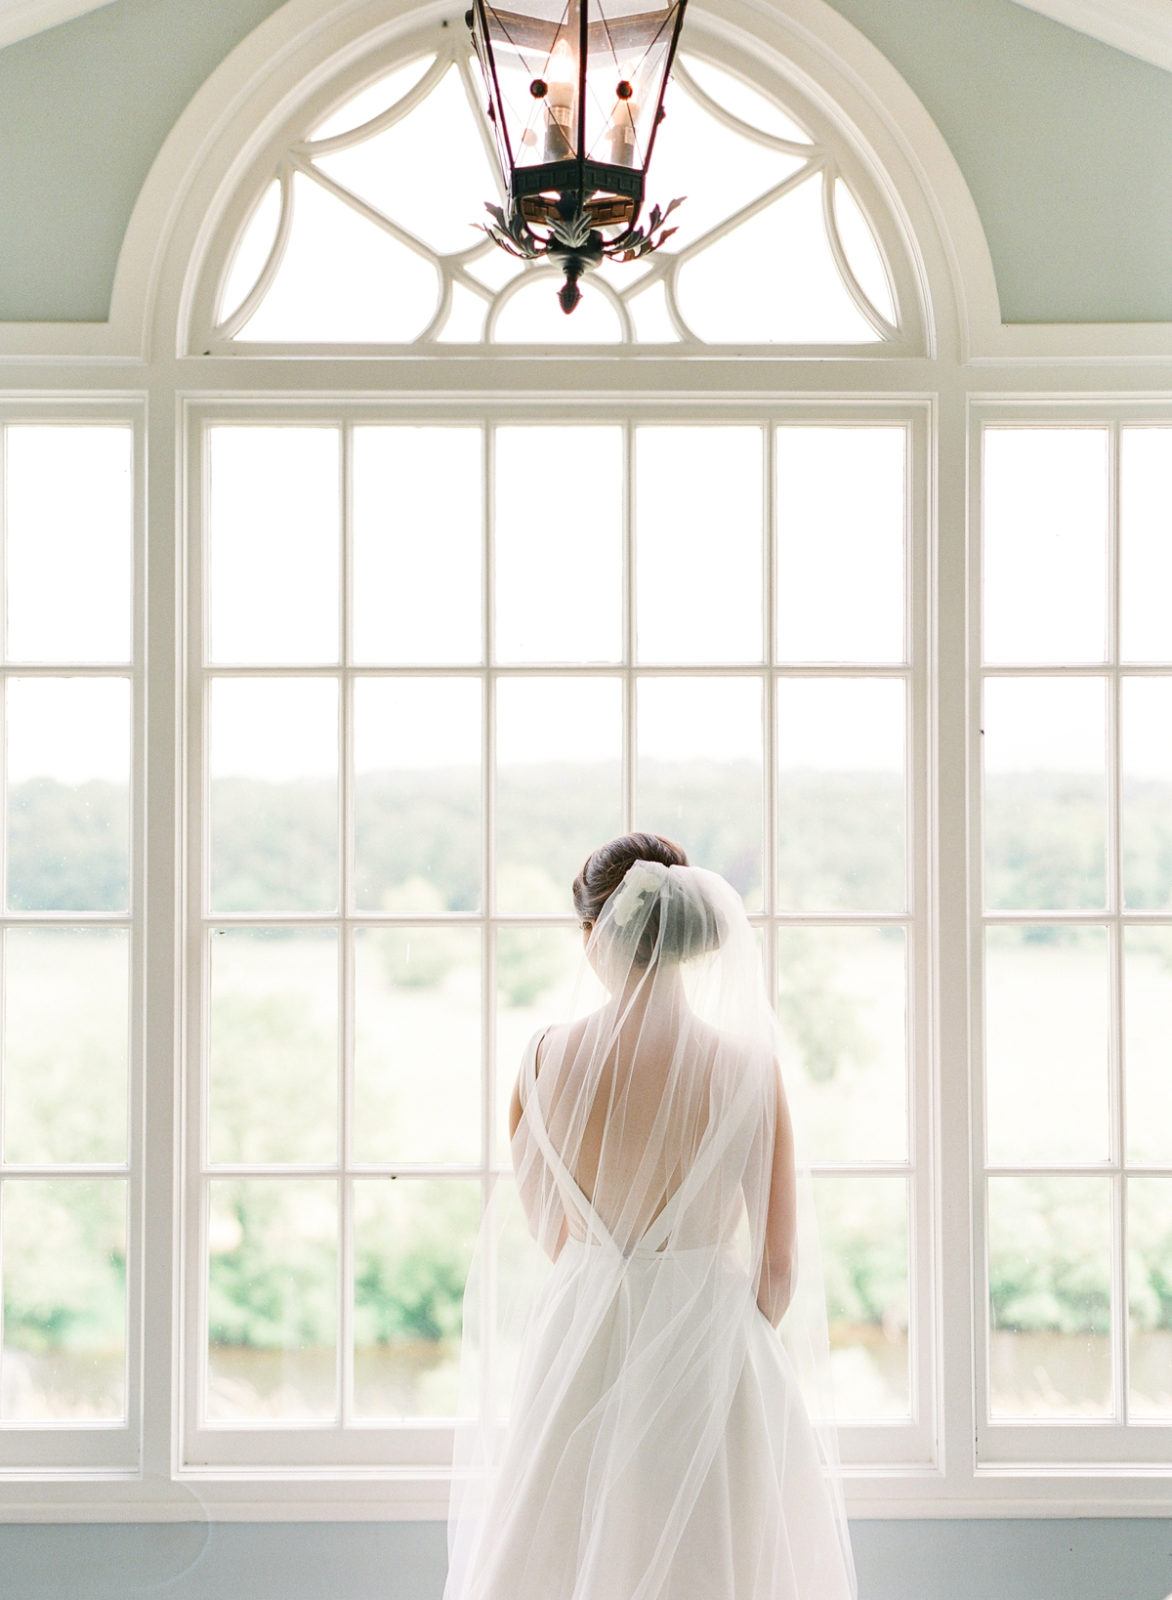 Ireland Film Photographer | Molly Carr Photography | Mount Juliet Estate Wedding with Bride in Jenny Yoo Dress and Veil Looking Out the Window